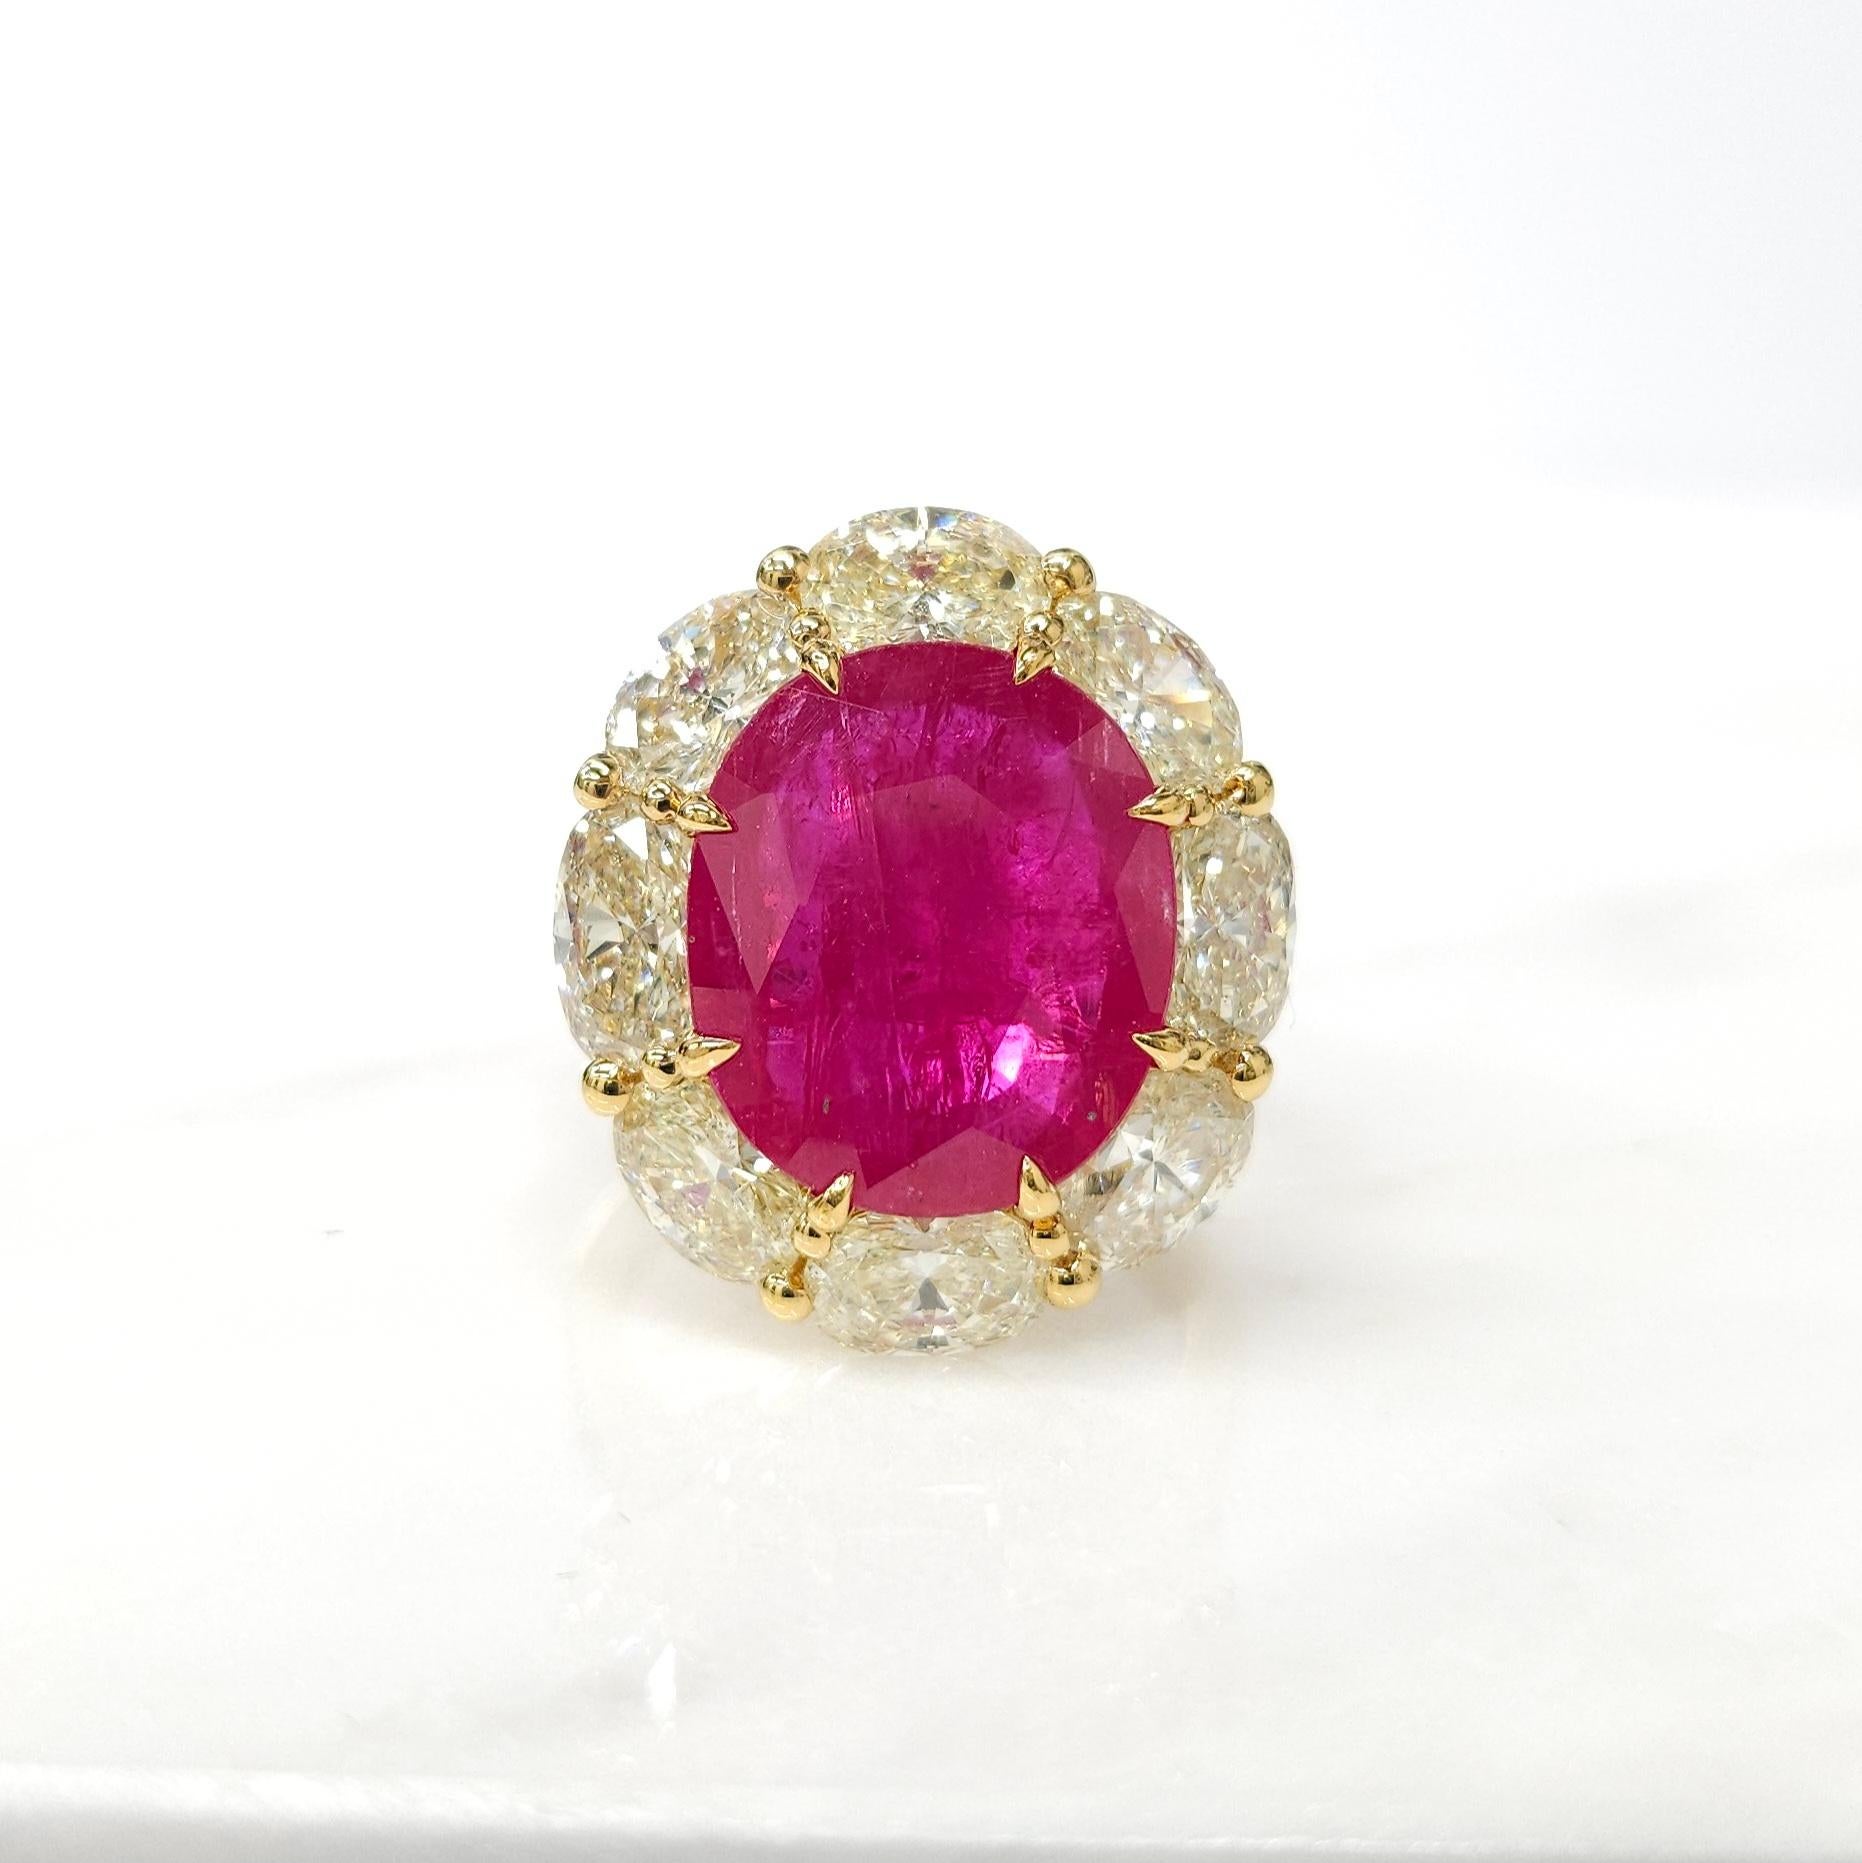 IGI Certified 6.53 Carat Ruby & 3.71 Carat Oval Diamond Ring in 18K Yellow Gold For Sale 5